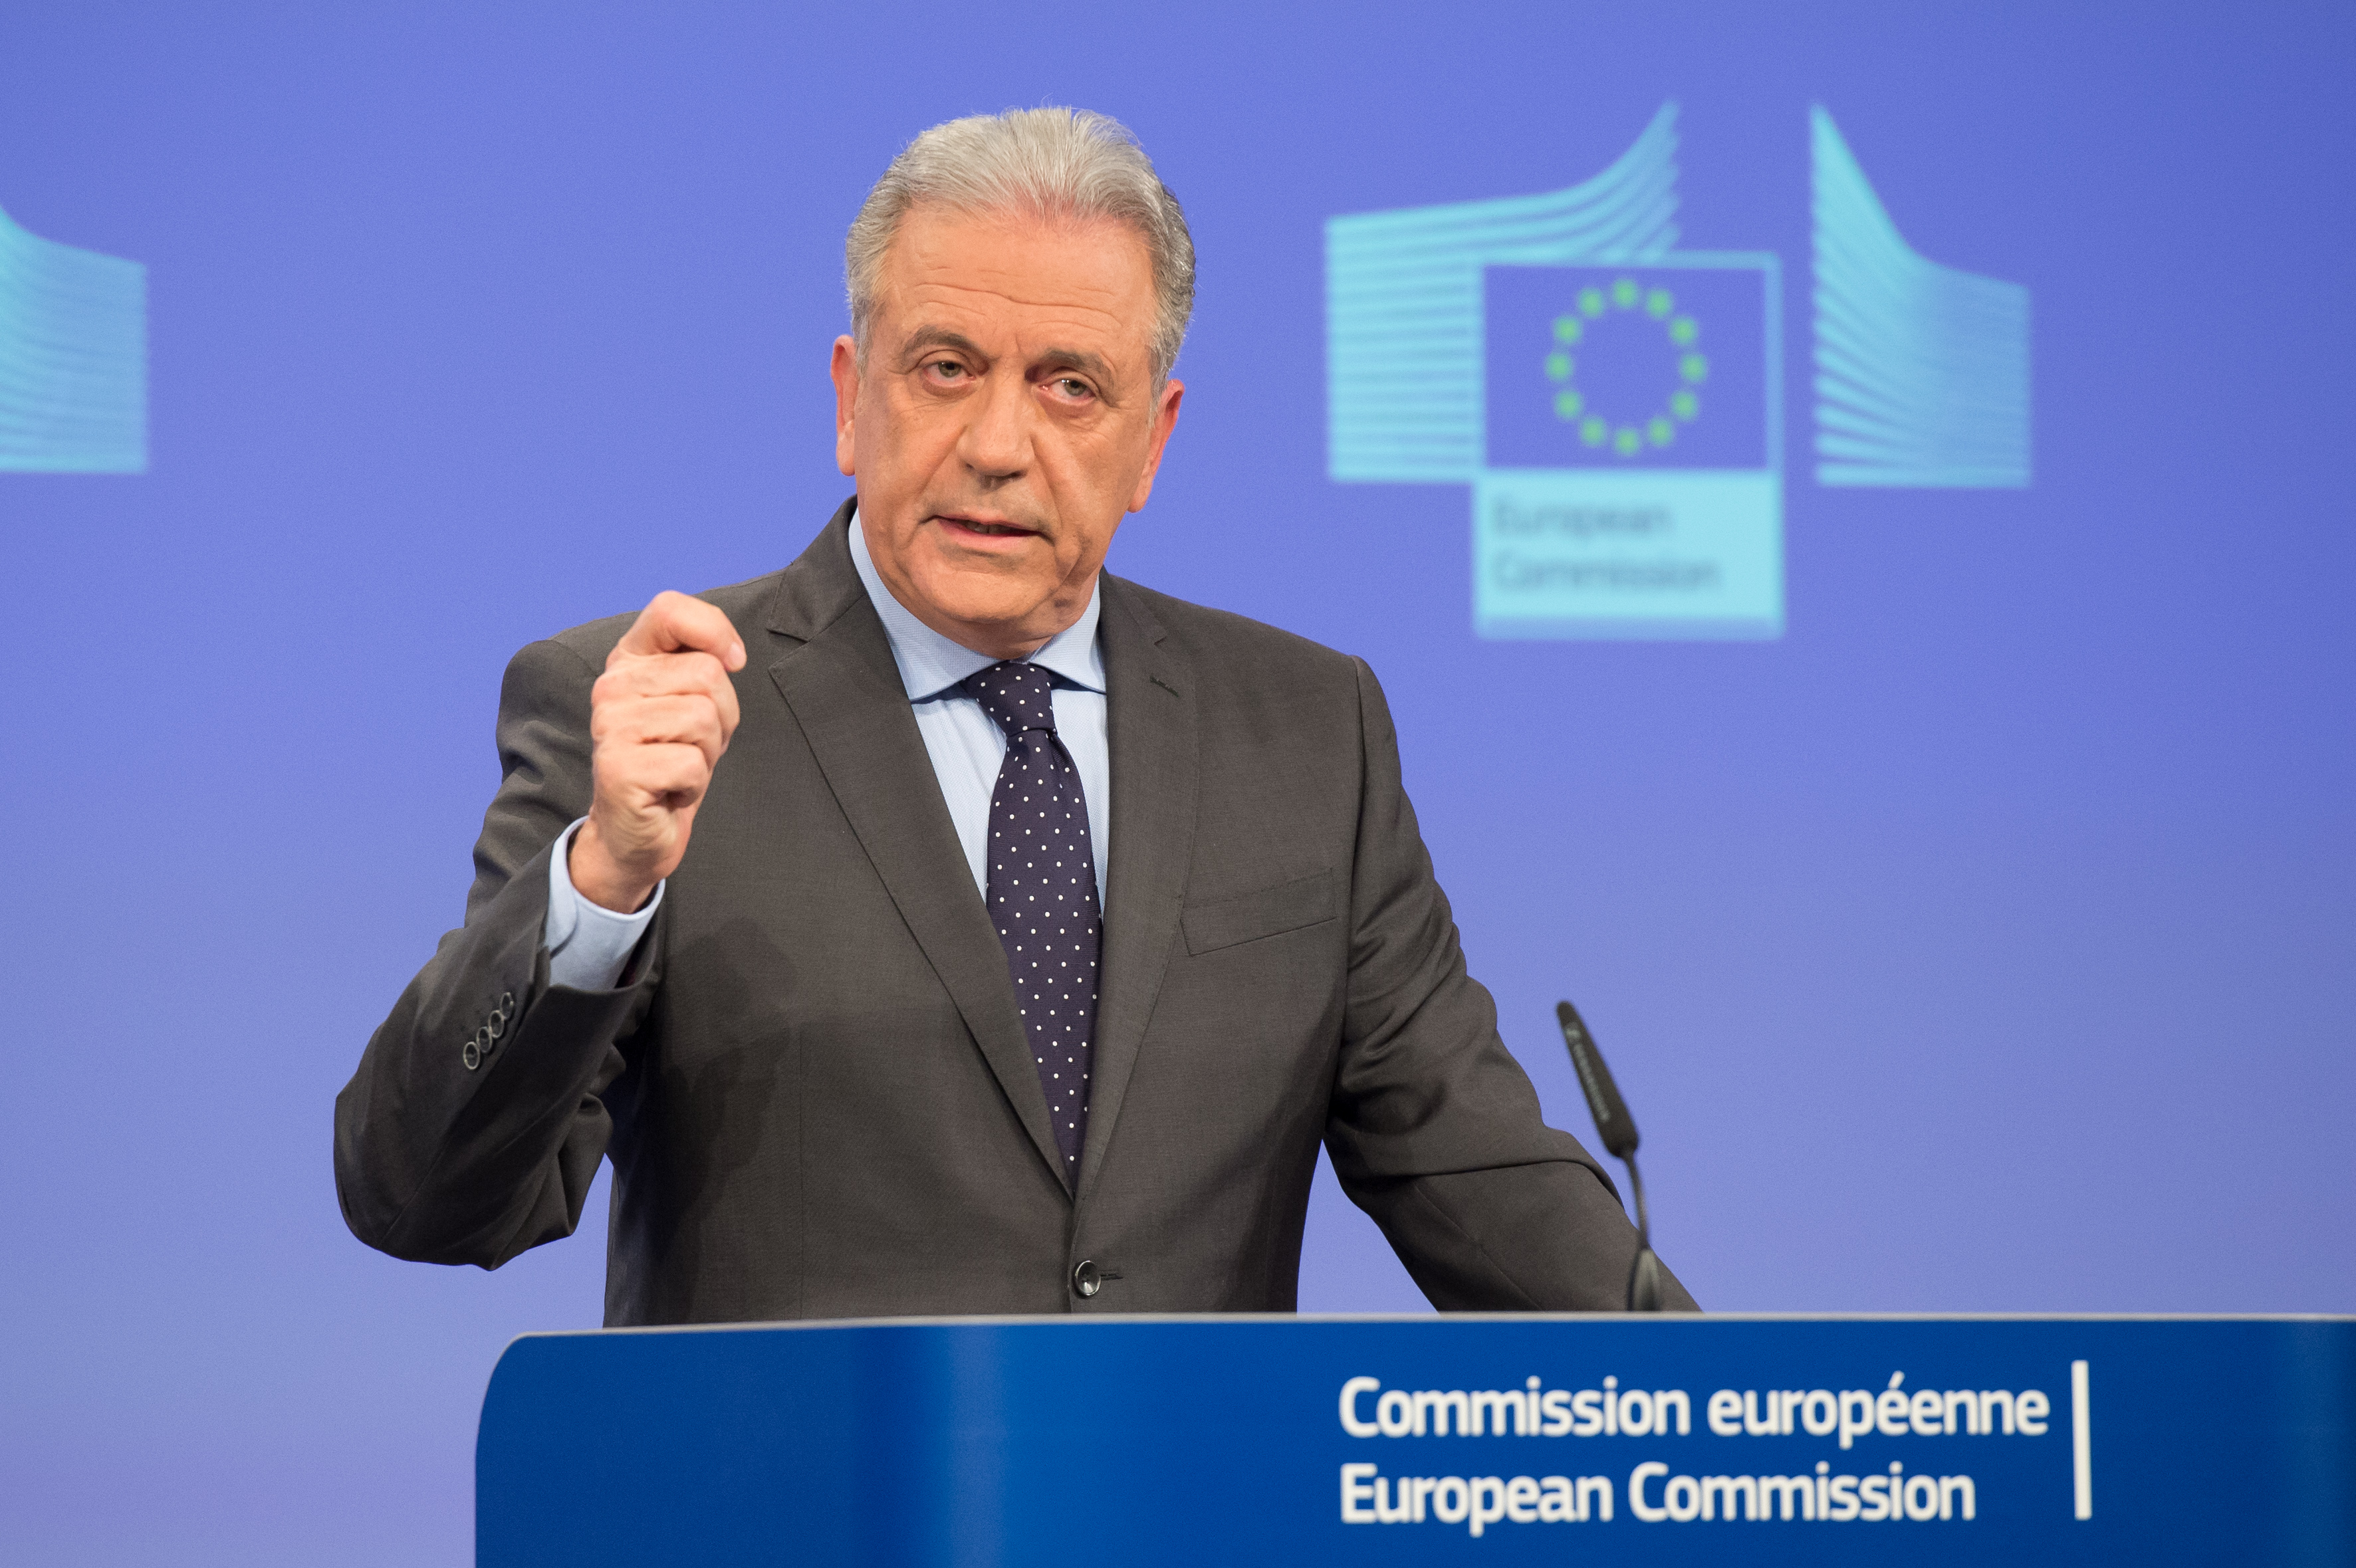 Image of EU's migration Commissioner, Dimitris Avramopoulos, at the European Commission (by ACN)